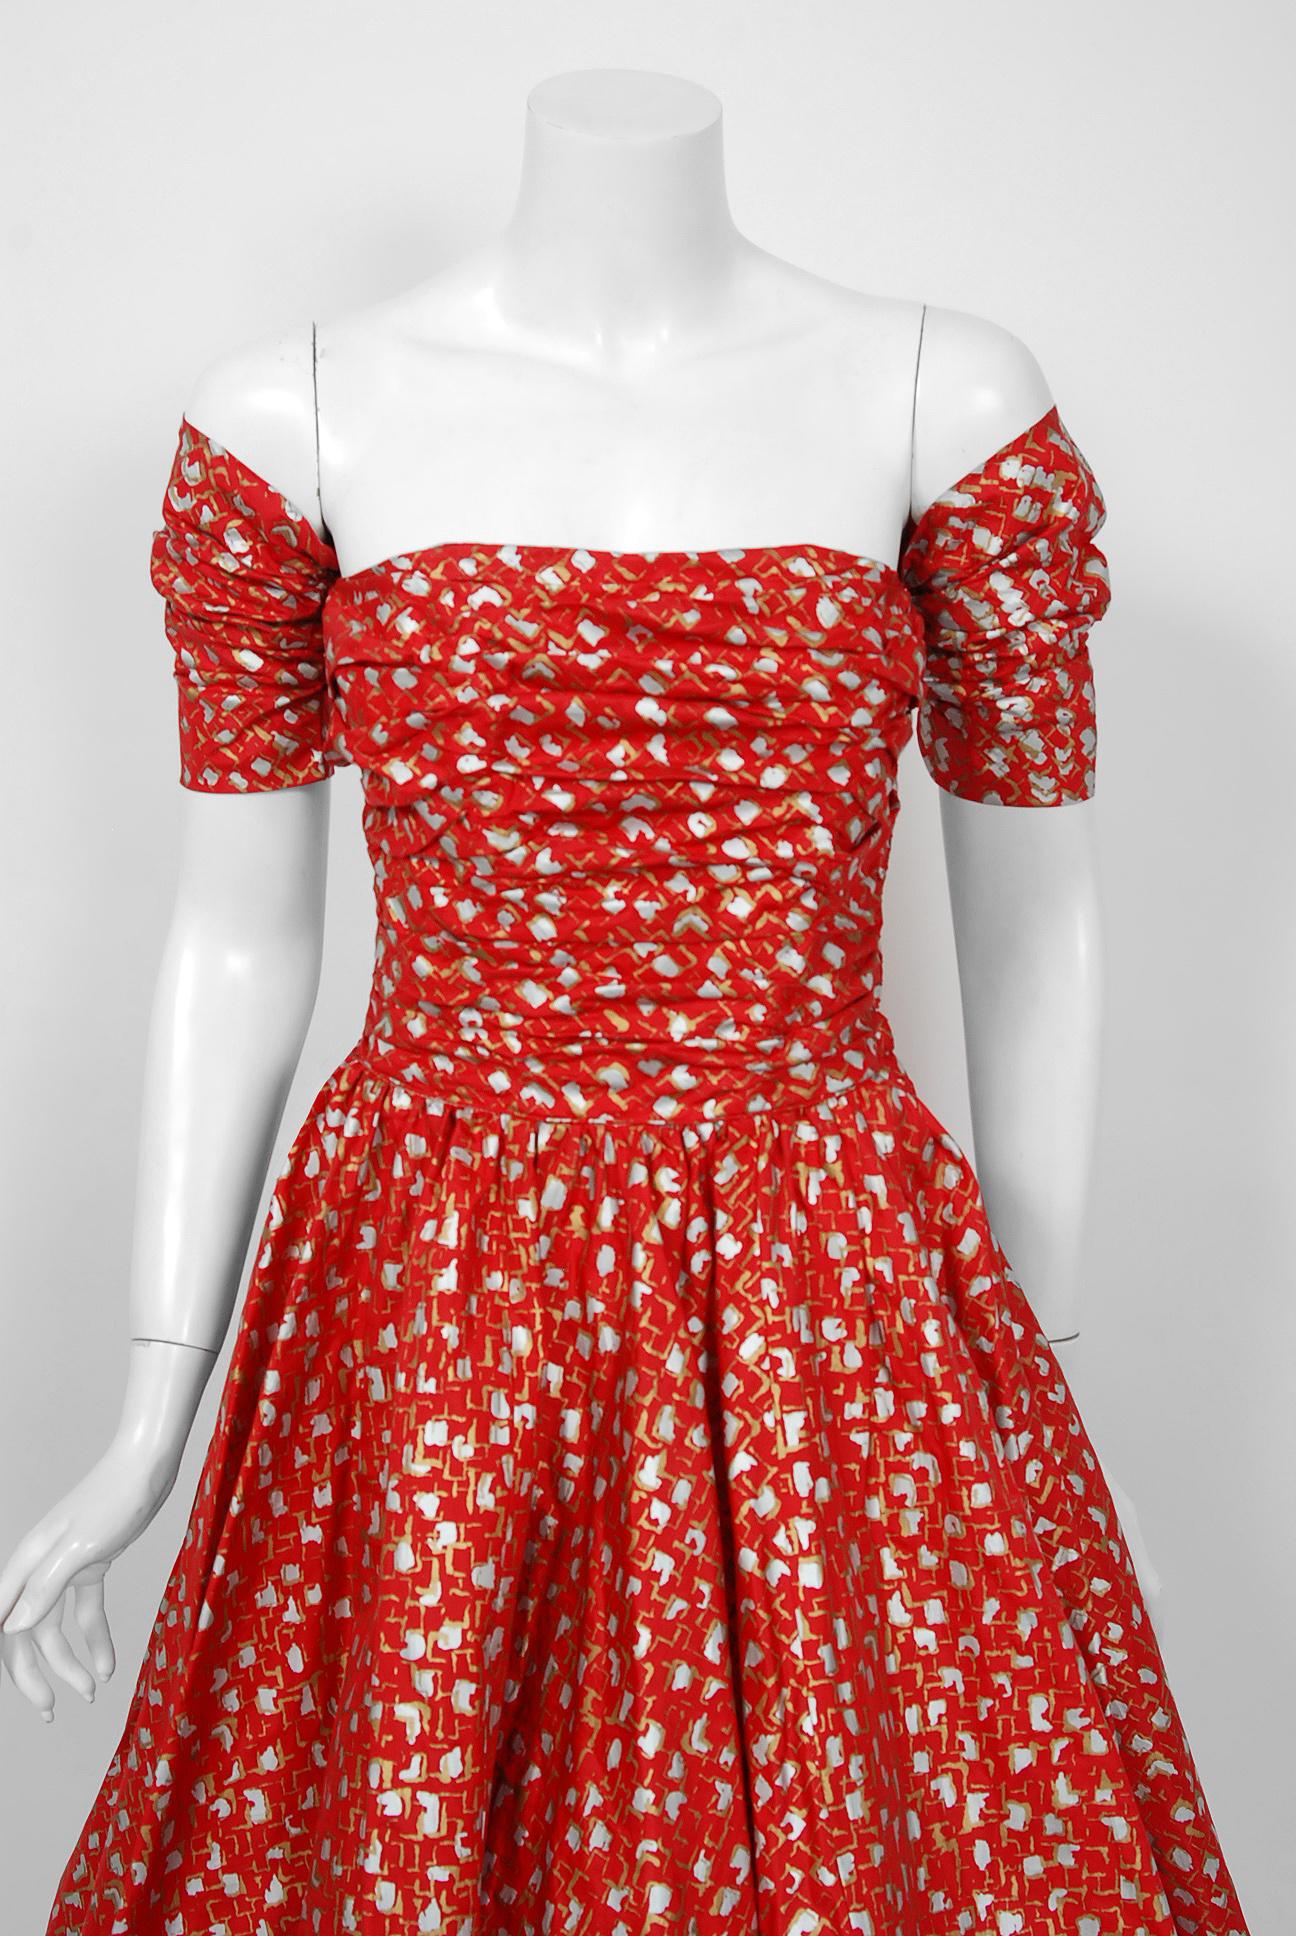 A magnificent 1950's creation by the iconic dress designer Fred Perlberg. It's hard to believe this beauty is over 60 years ago; as she looks so modernly fresh! This gorgeous garment is fashioned from atomic metallic printed light-weight silk in the